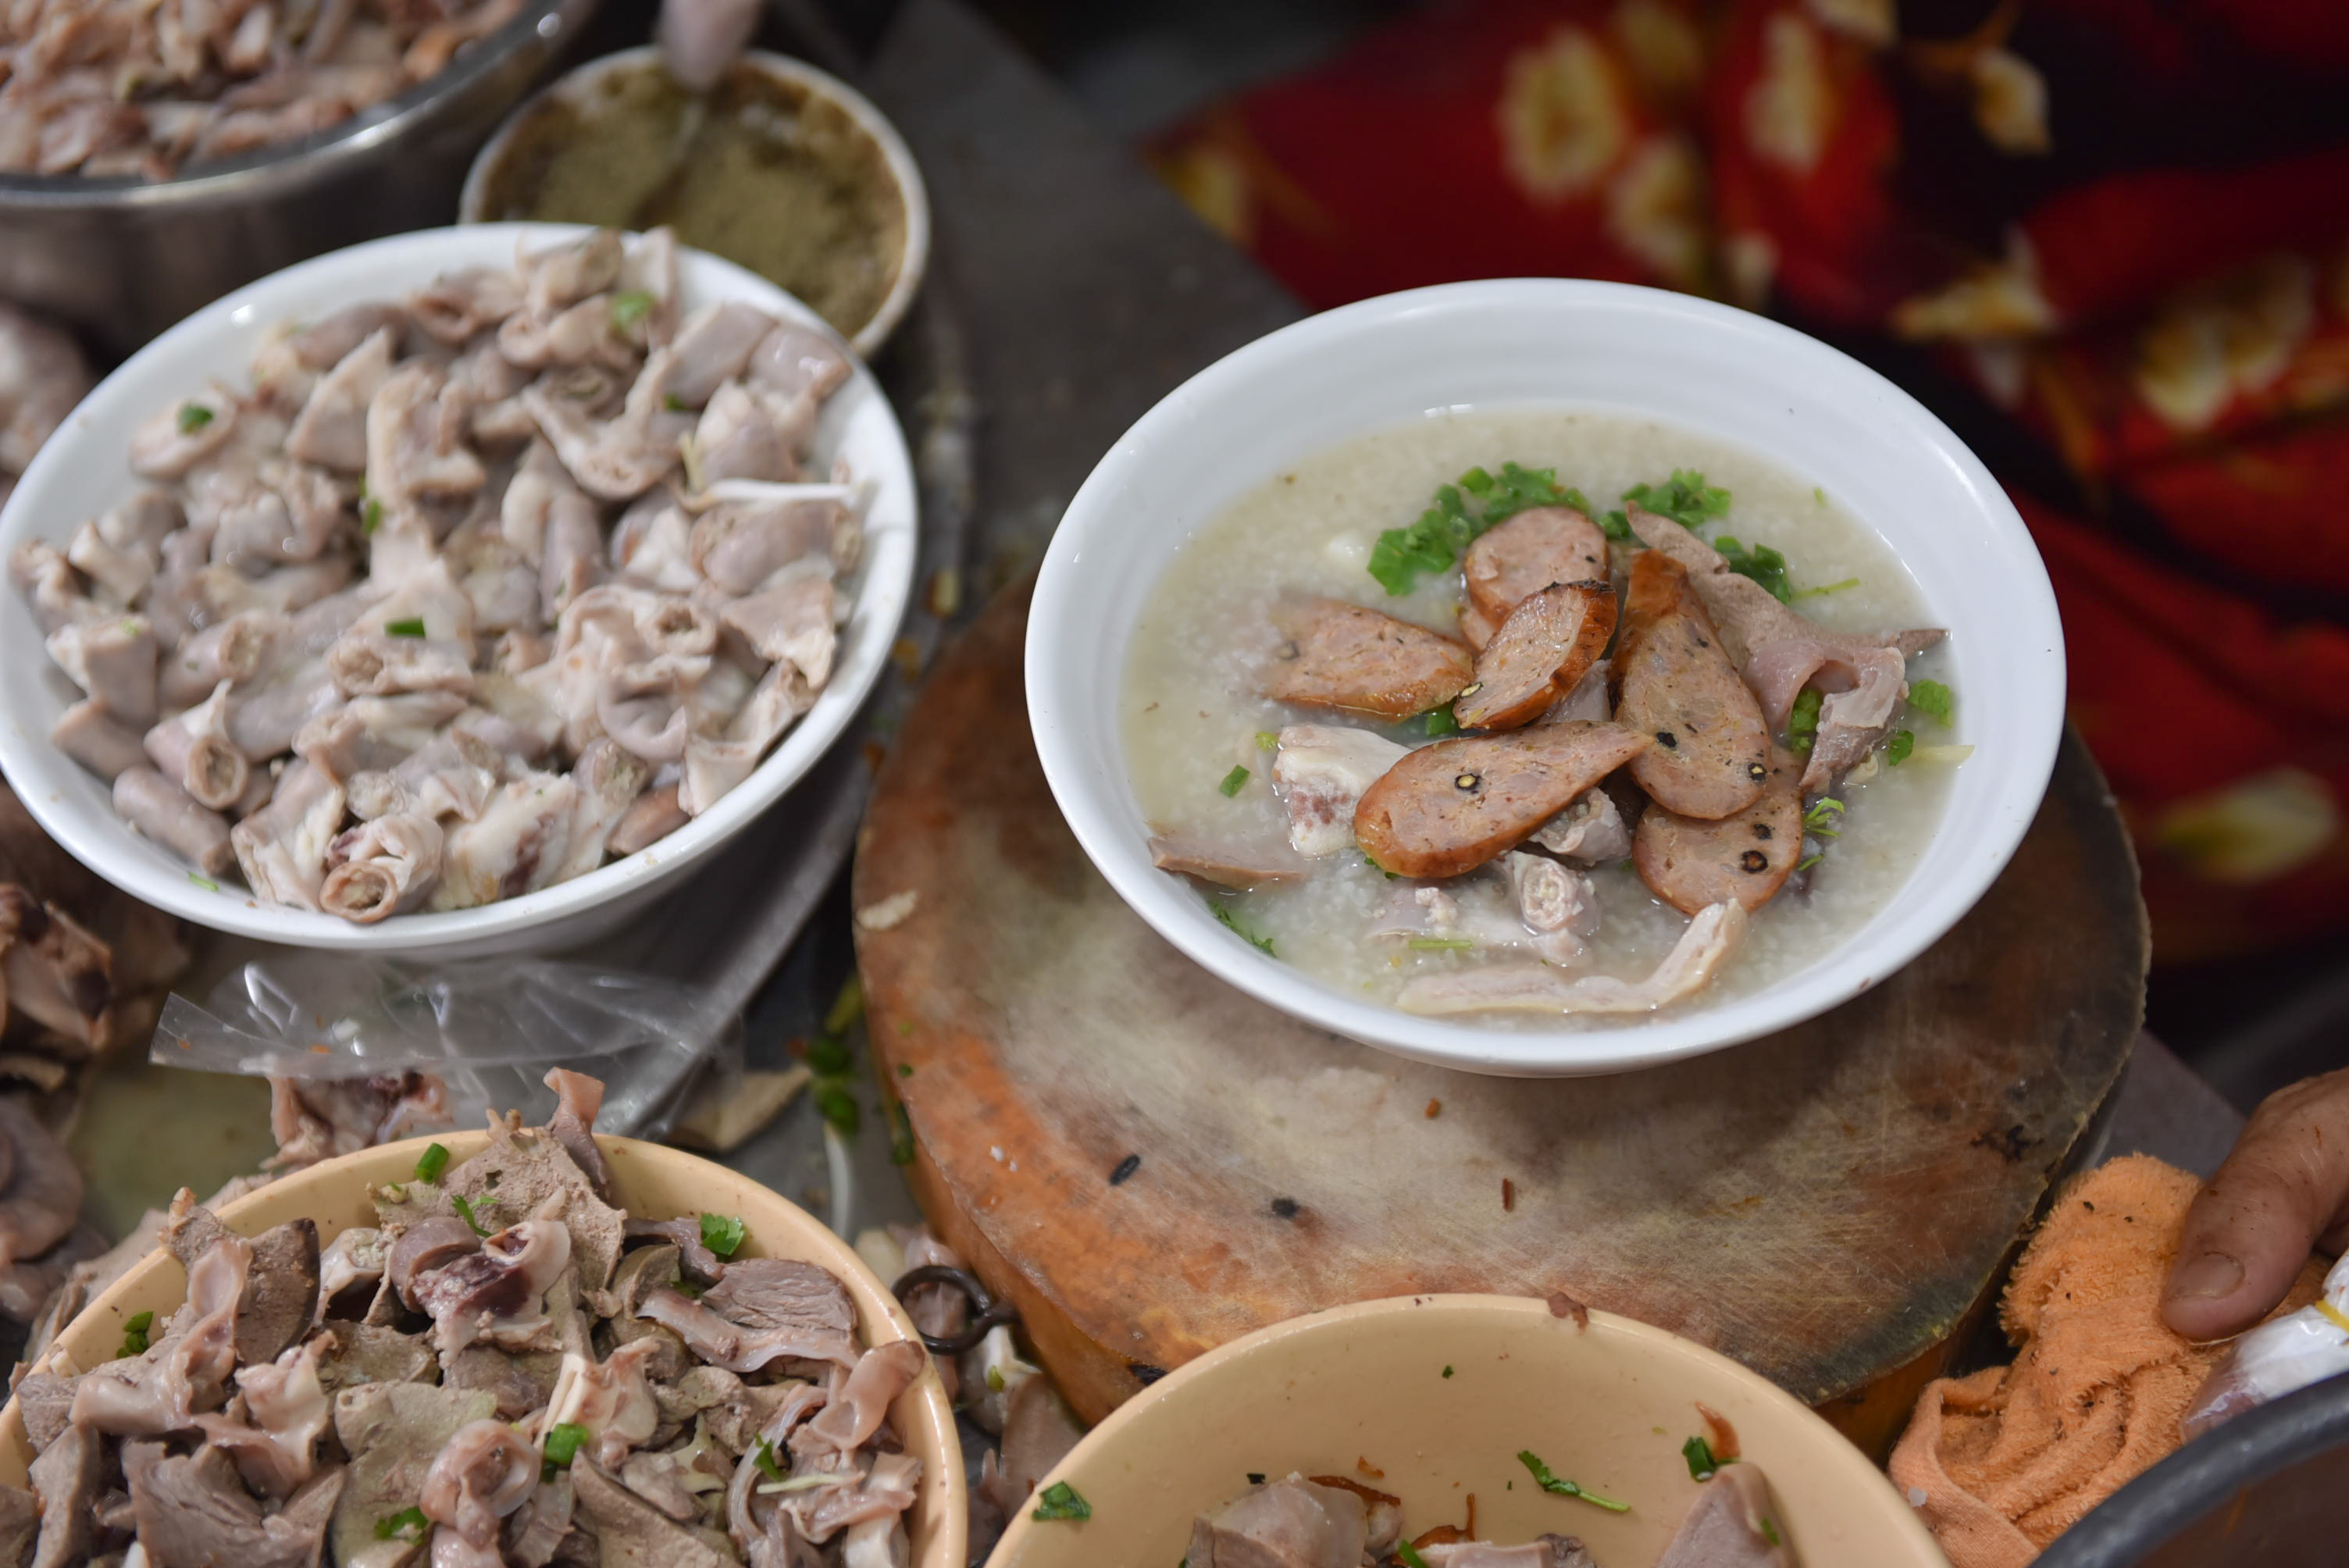 Noodles on Monday, soup on Tuesday: Daily rotating menus at local street food stalls keep diners on their toes